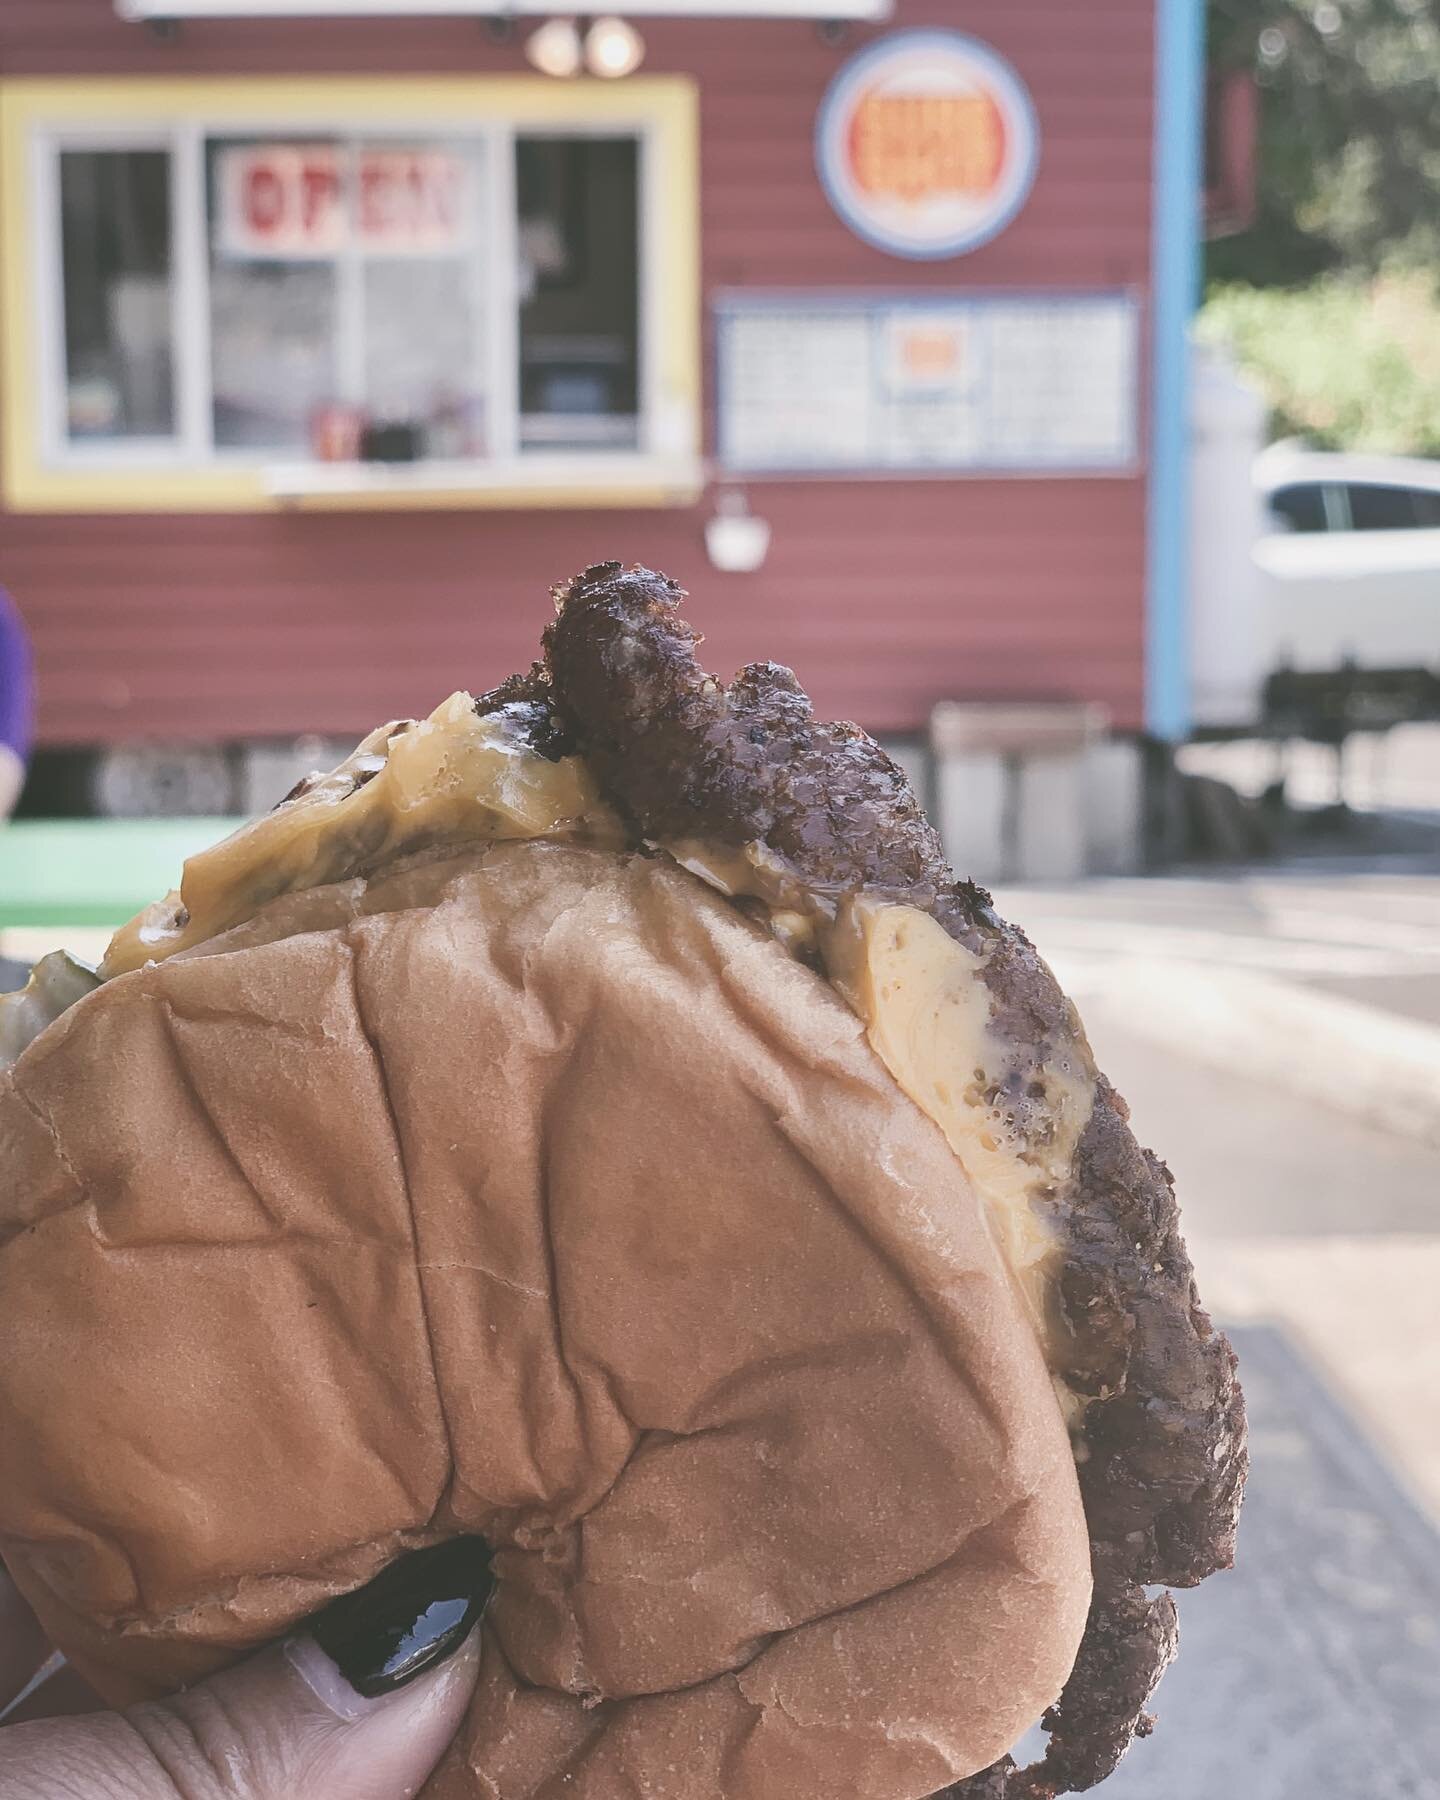 Smash burgers = the perfect road trip fuel. Can we talk about those craggily edges though? 5/5 would smash again 🍔